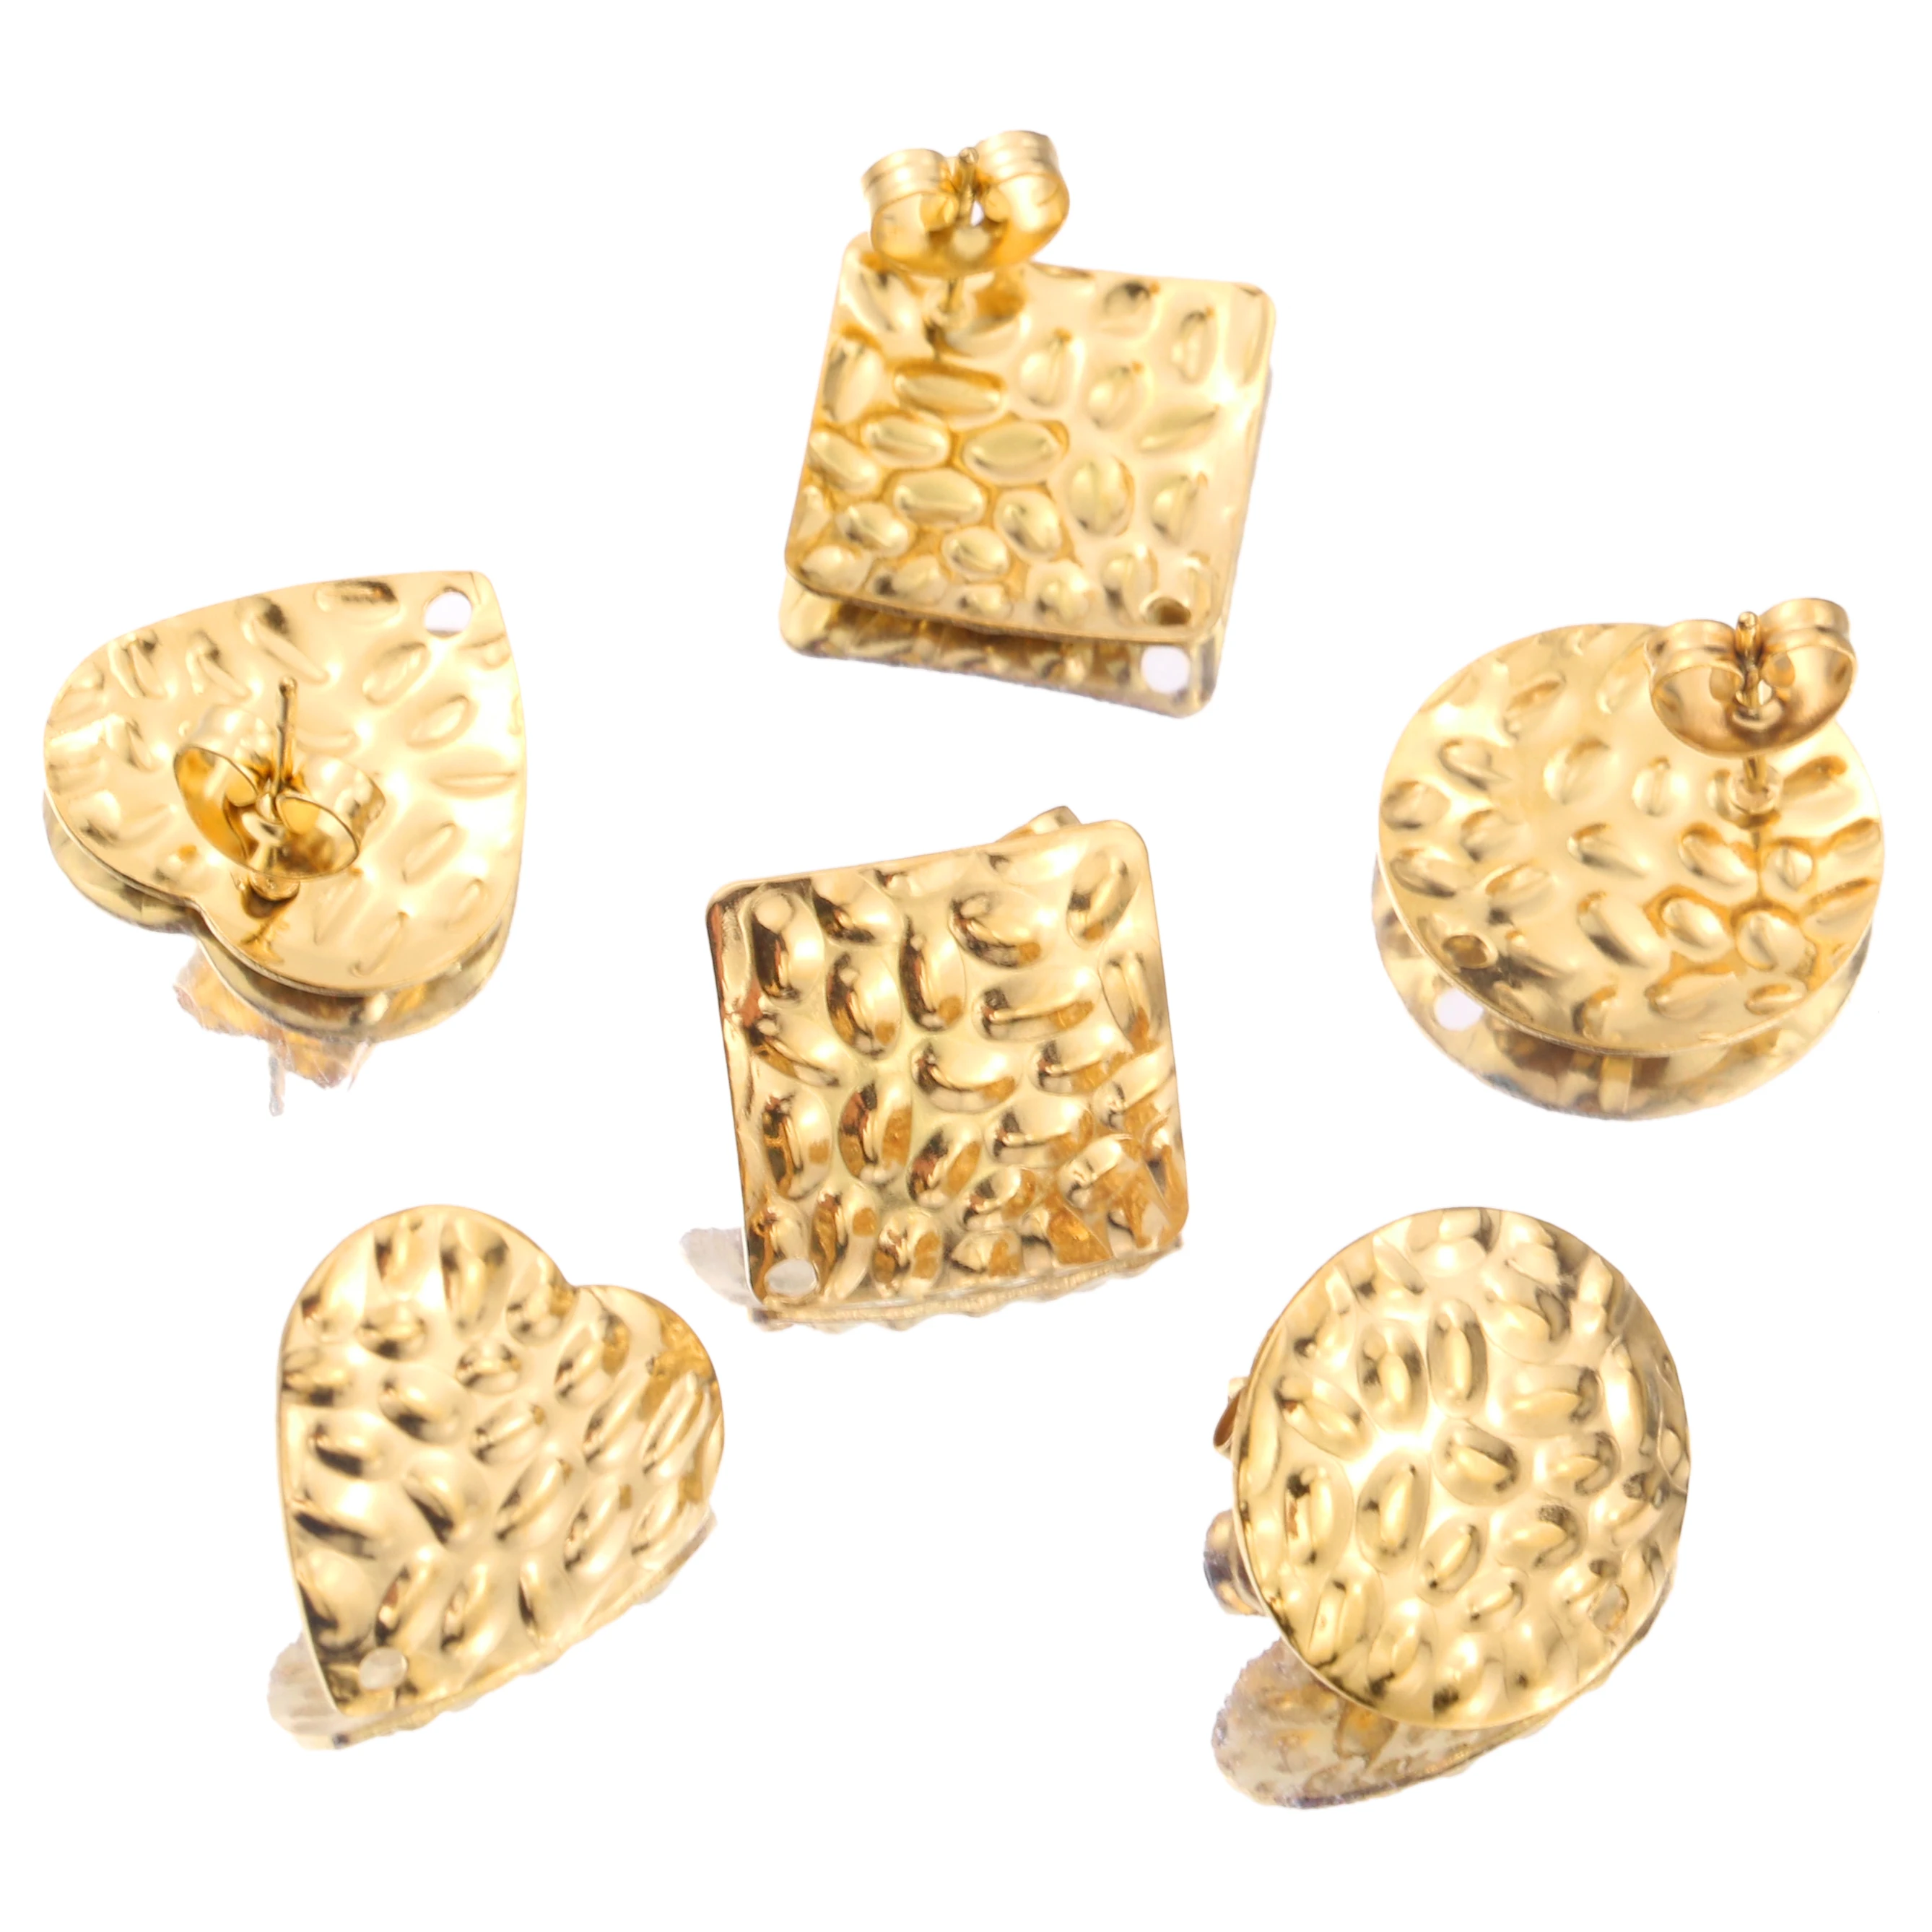 10pcs Stainless Steel Gold Bump Round Heart Square Stud Earring Ear Base for DIY Hand Made Earrings Jewelry Making Supplies